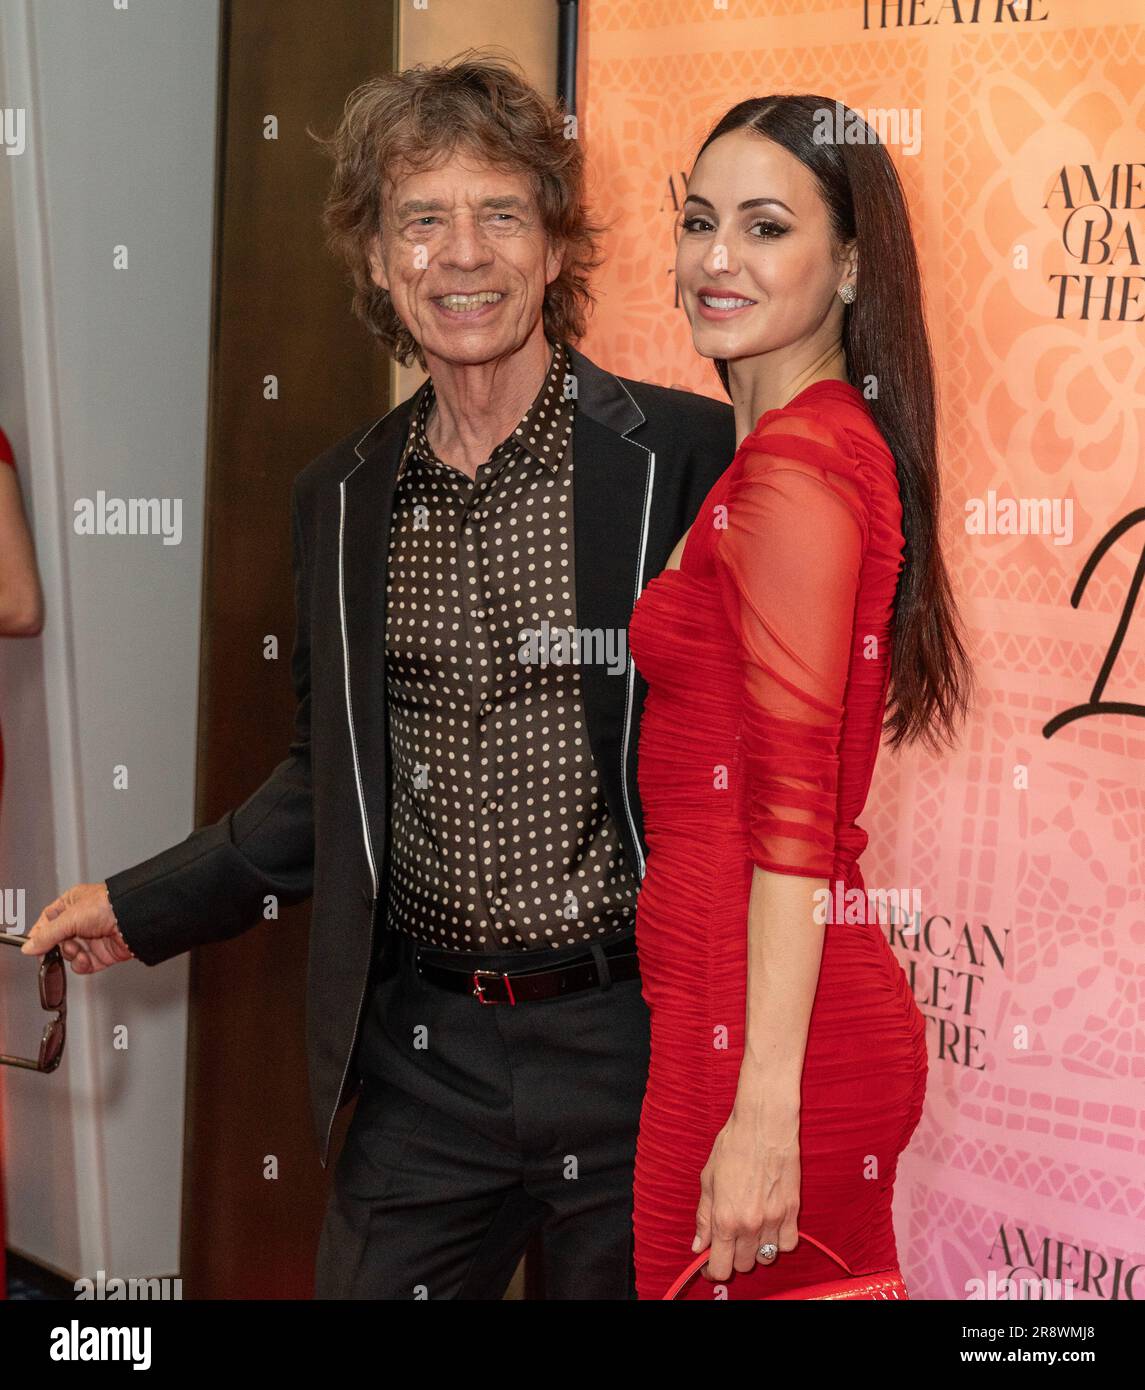 Mick Jagger and Melanie Hamrick attend 2023 American Ballet Theatre's June Gala and Premiere of 'Like Water For Chocolate' in New York on June 22, 2023 at The Metropolitan Opera House Stock Photo